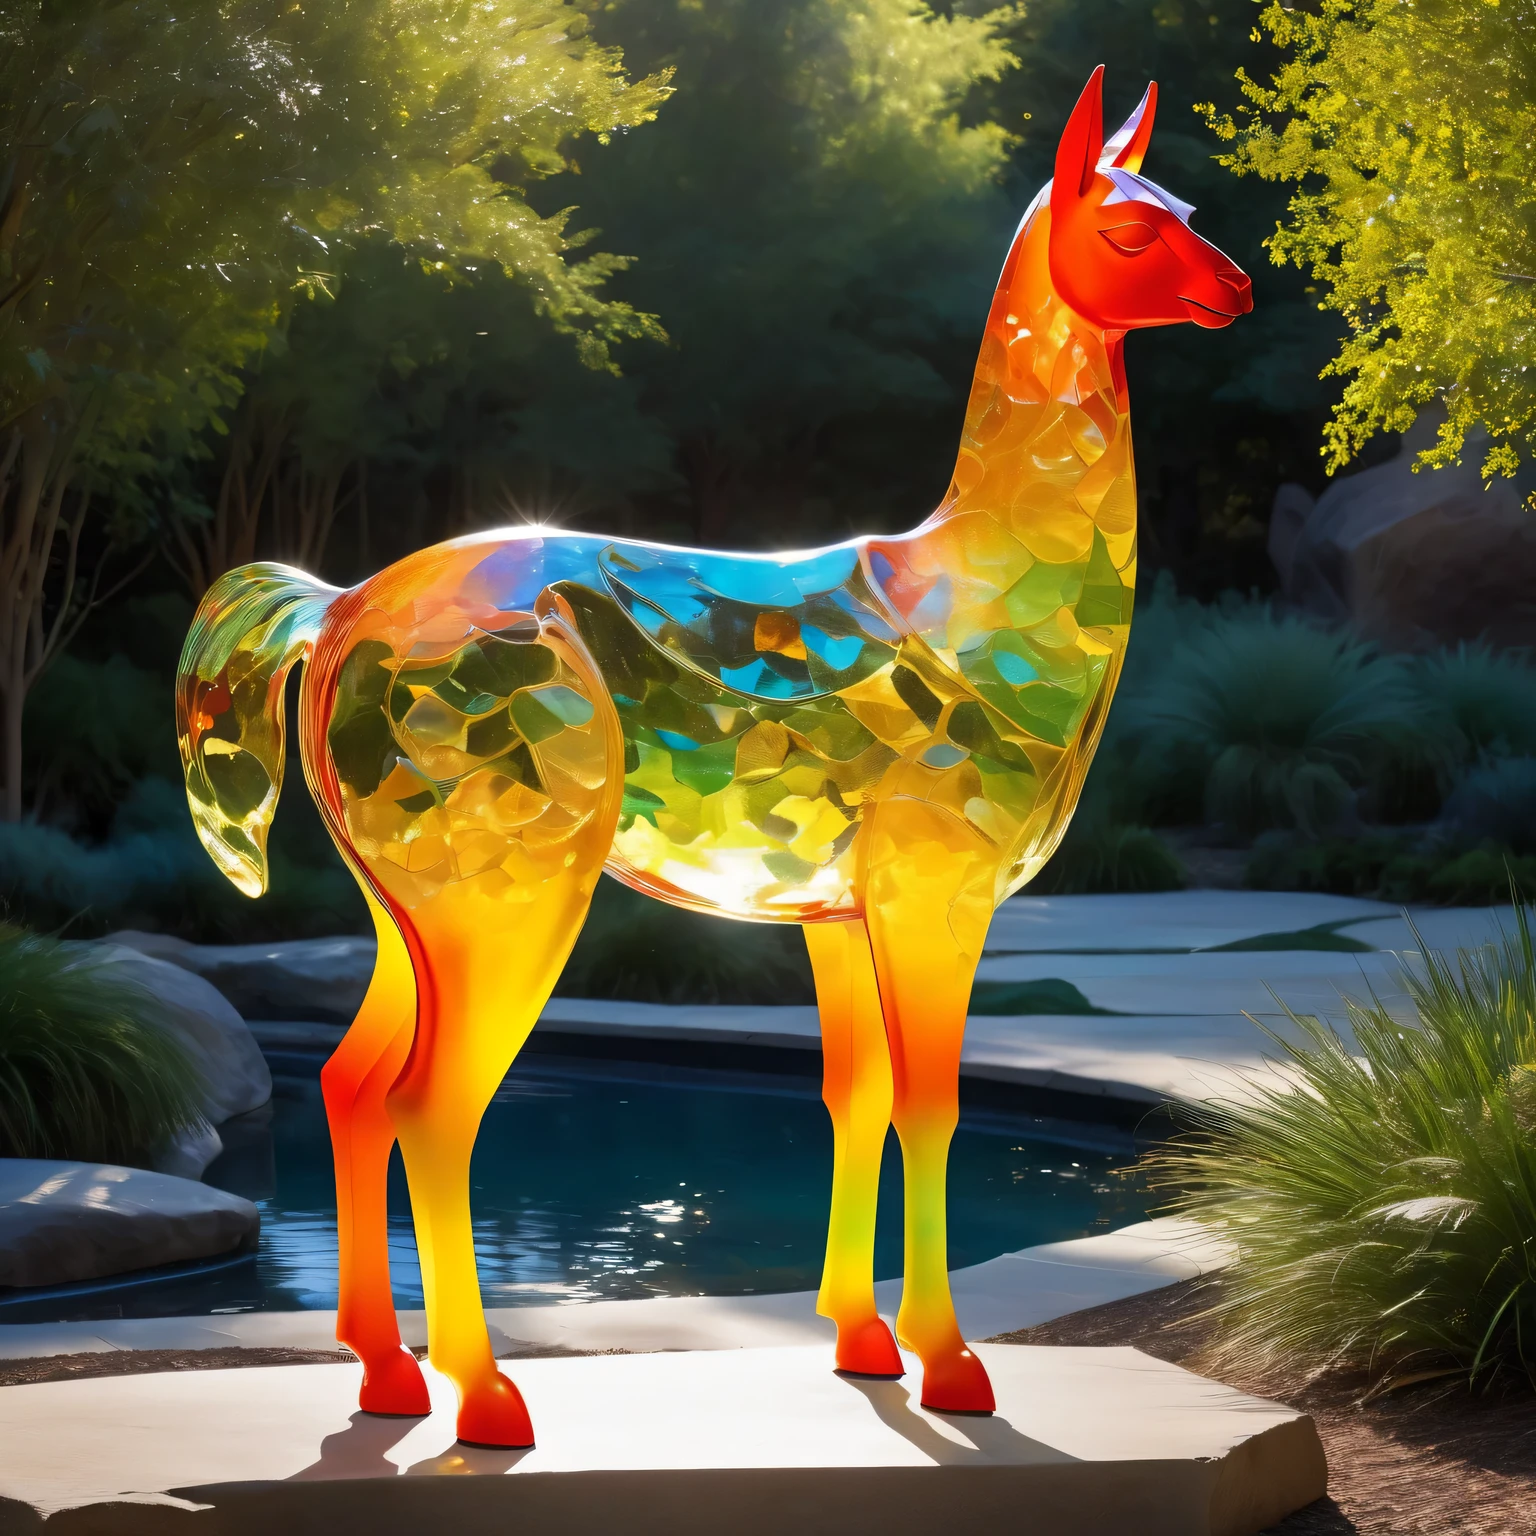 vibrant colors glassy llama sculpture,shattered reflections,sunlight,crisp details,sparkling surface,modern art,translucent material,abstract,sculpture garden,dynamic pose,unique form,ethereal,graceful lines,dreamlike atmosphere,bright shadows,curved contours,playful,contemporary masterpiece,luminous,subtle textures,splintered light,harmonious composition,dappled sunlight,smooth curves,imaginative,youthful spirit,sculptural textures,glowing,lyrical motion,delicate balance,emerging from nature,serene expression,fluid shapes,dynamic mix of transparency and opacity,straight edges,intertwined glass,mesmerizing,detailed craftsmanship,lively presence,marvel of precision,artistic marvel,modern symphony